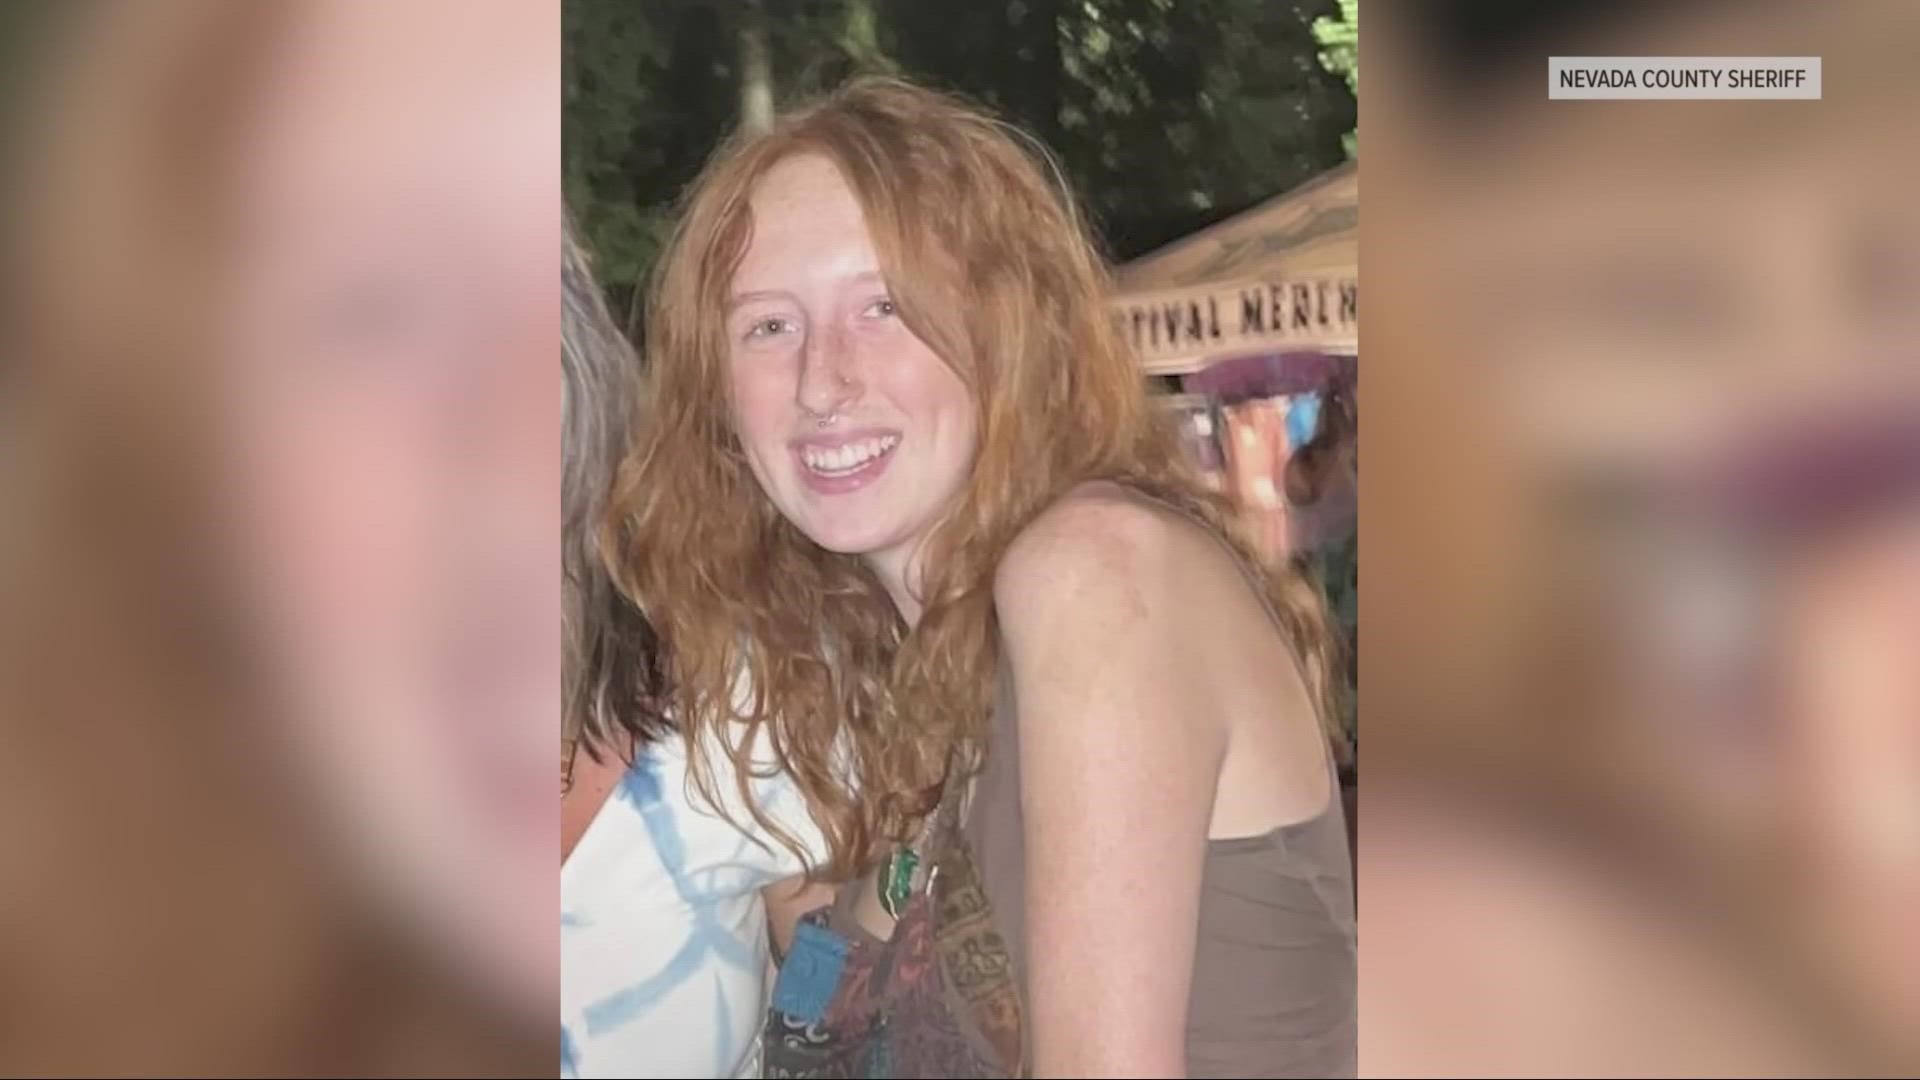 Trinity was last seen Wednesday night walking away from a house in Nevada County.